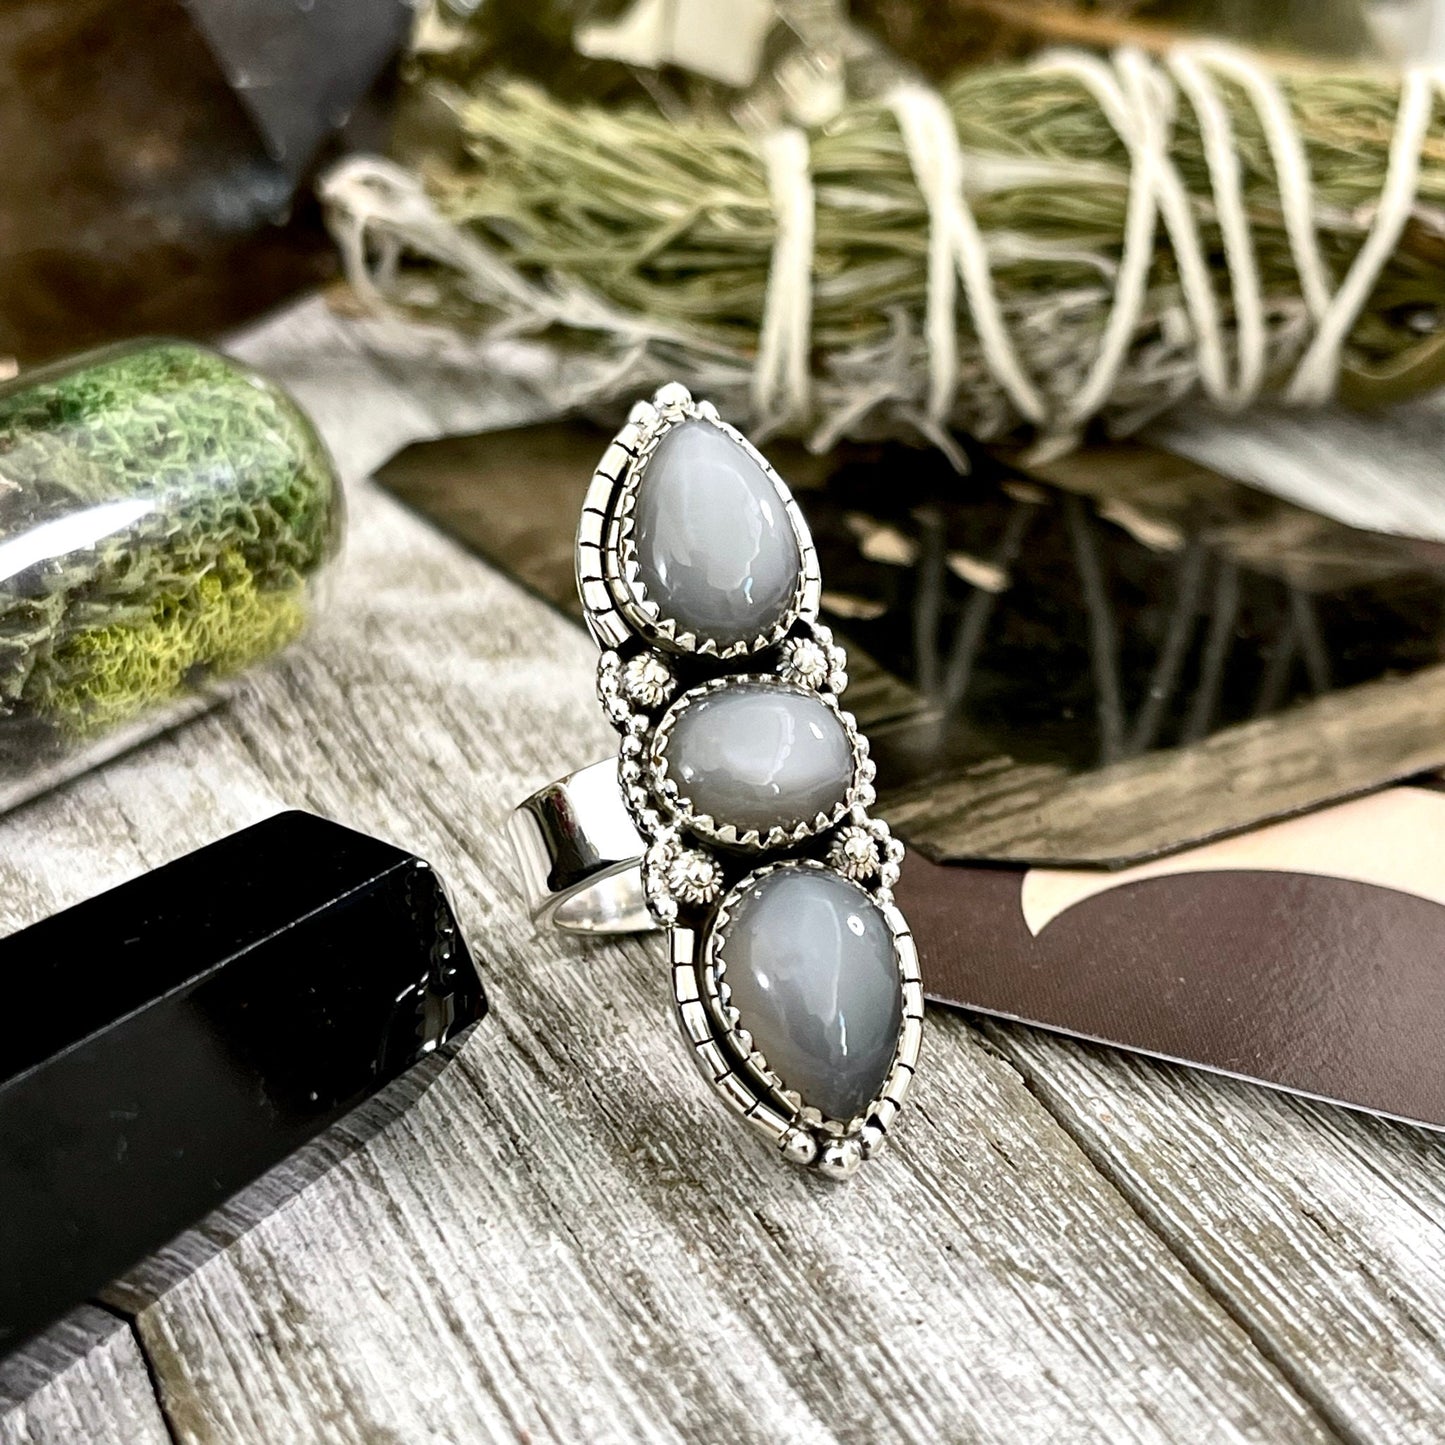 3 Stone Ring, Big Stone Ring, Bohemian Ring, Boho Jewelry, Boho Ring, Crystal Ring, Etsy Id 1064530524, Foxlark Alchemy, Foxlark- Rings, Gift For Woman, Grey Moonstone, Gypsy Ring, Jewelry, Rings, Statement Rings, Wholesale